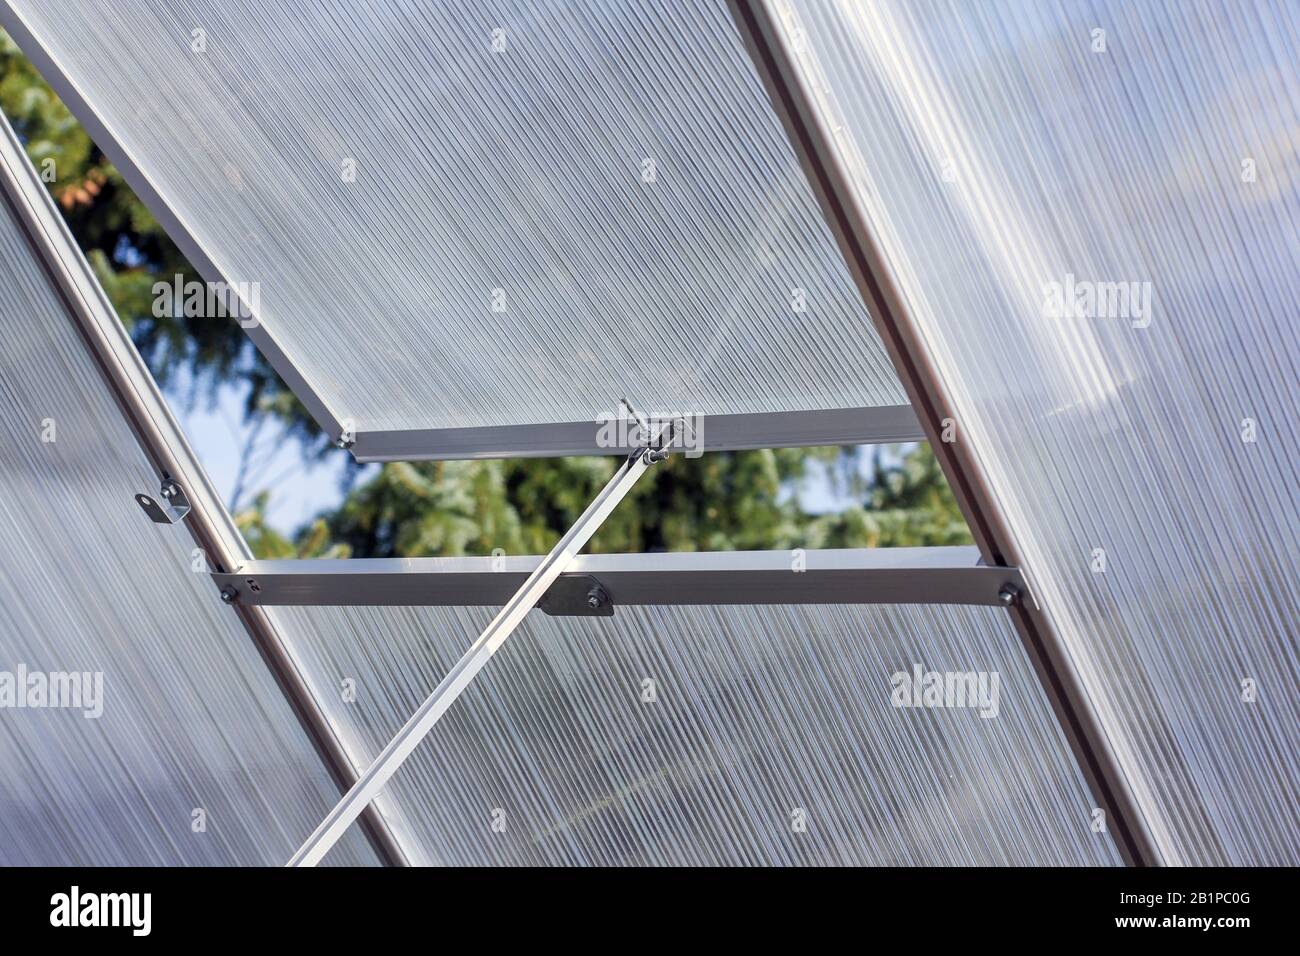 Greenhouse with open window for fresh air supply Stock Photo